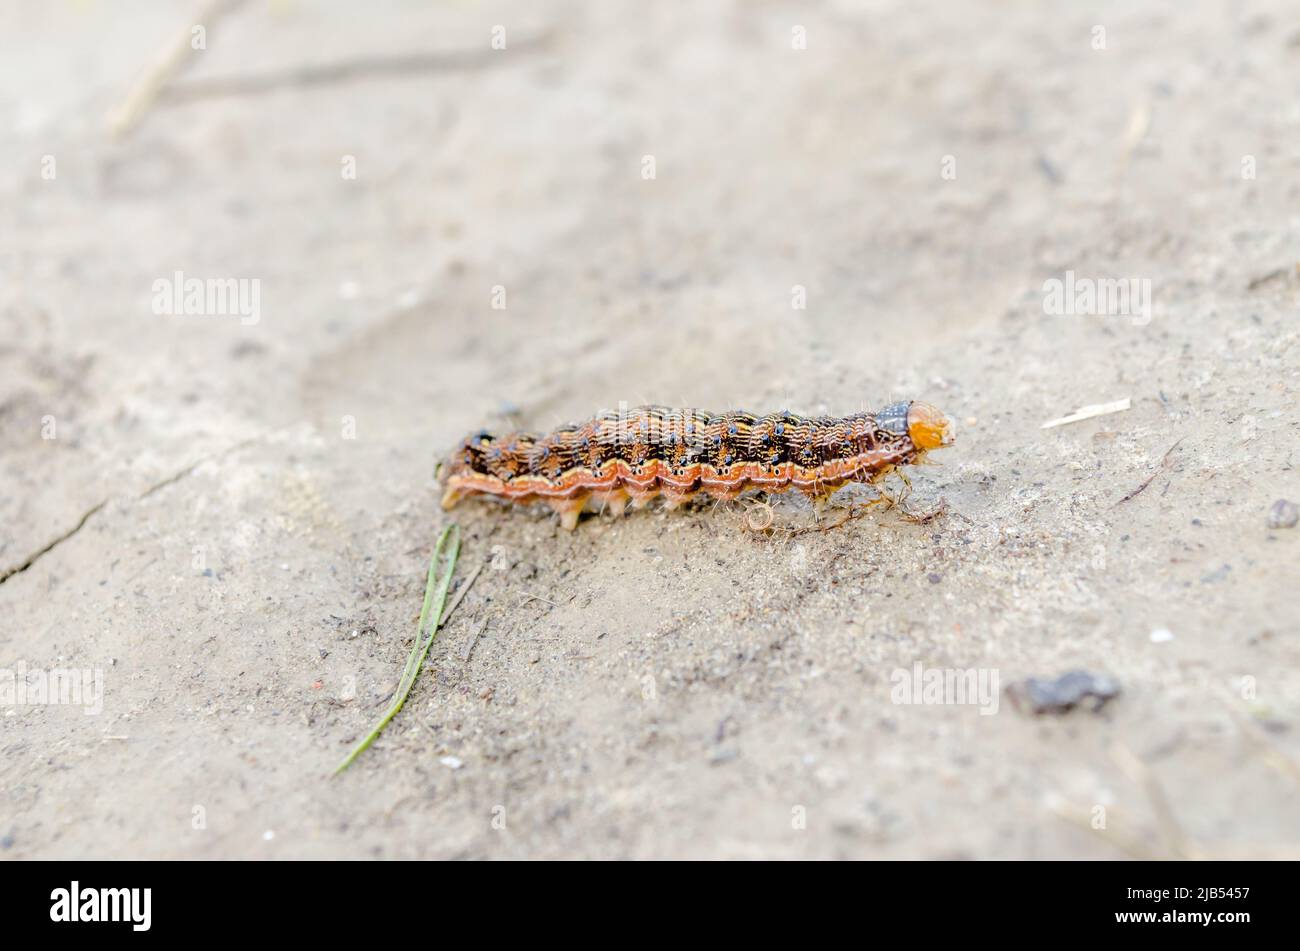 A caterpillar in a field in its natural environment. Stock Photo